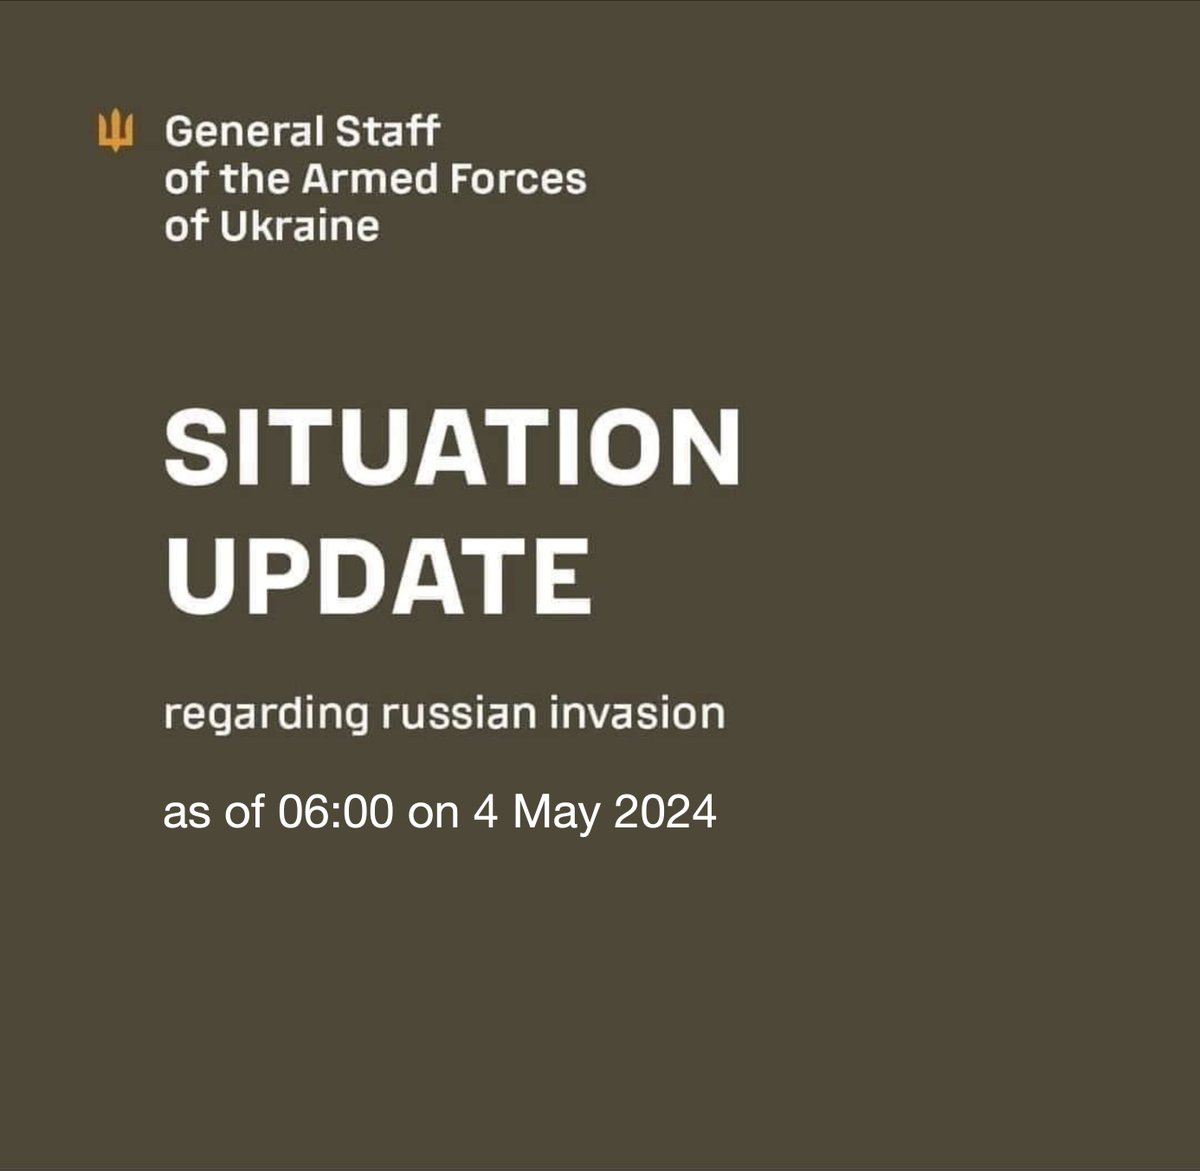 Over the past 24 hours, the Russian fascist invaders fired mortars and artillery at more than 110 hamlets, villages, towns and cities in Chernihiv, Sumy, Kharkiv, Luhansk, Donetsk, Zaporizhzhya, Dnipropetrovsk, Kherson and Mykolayiv regions.